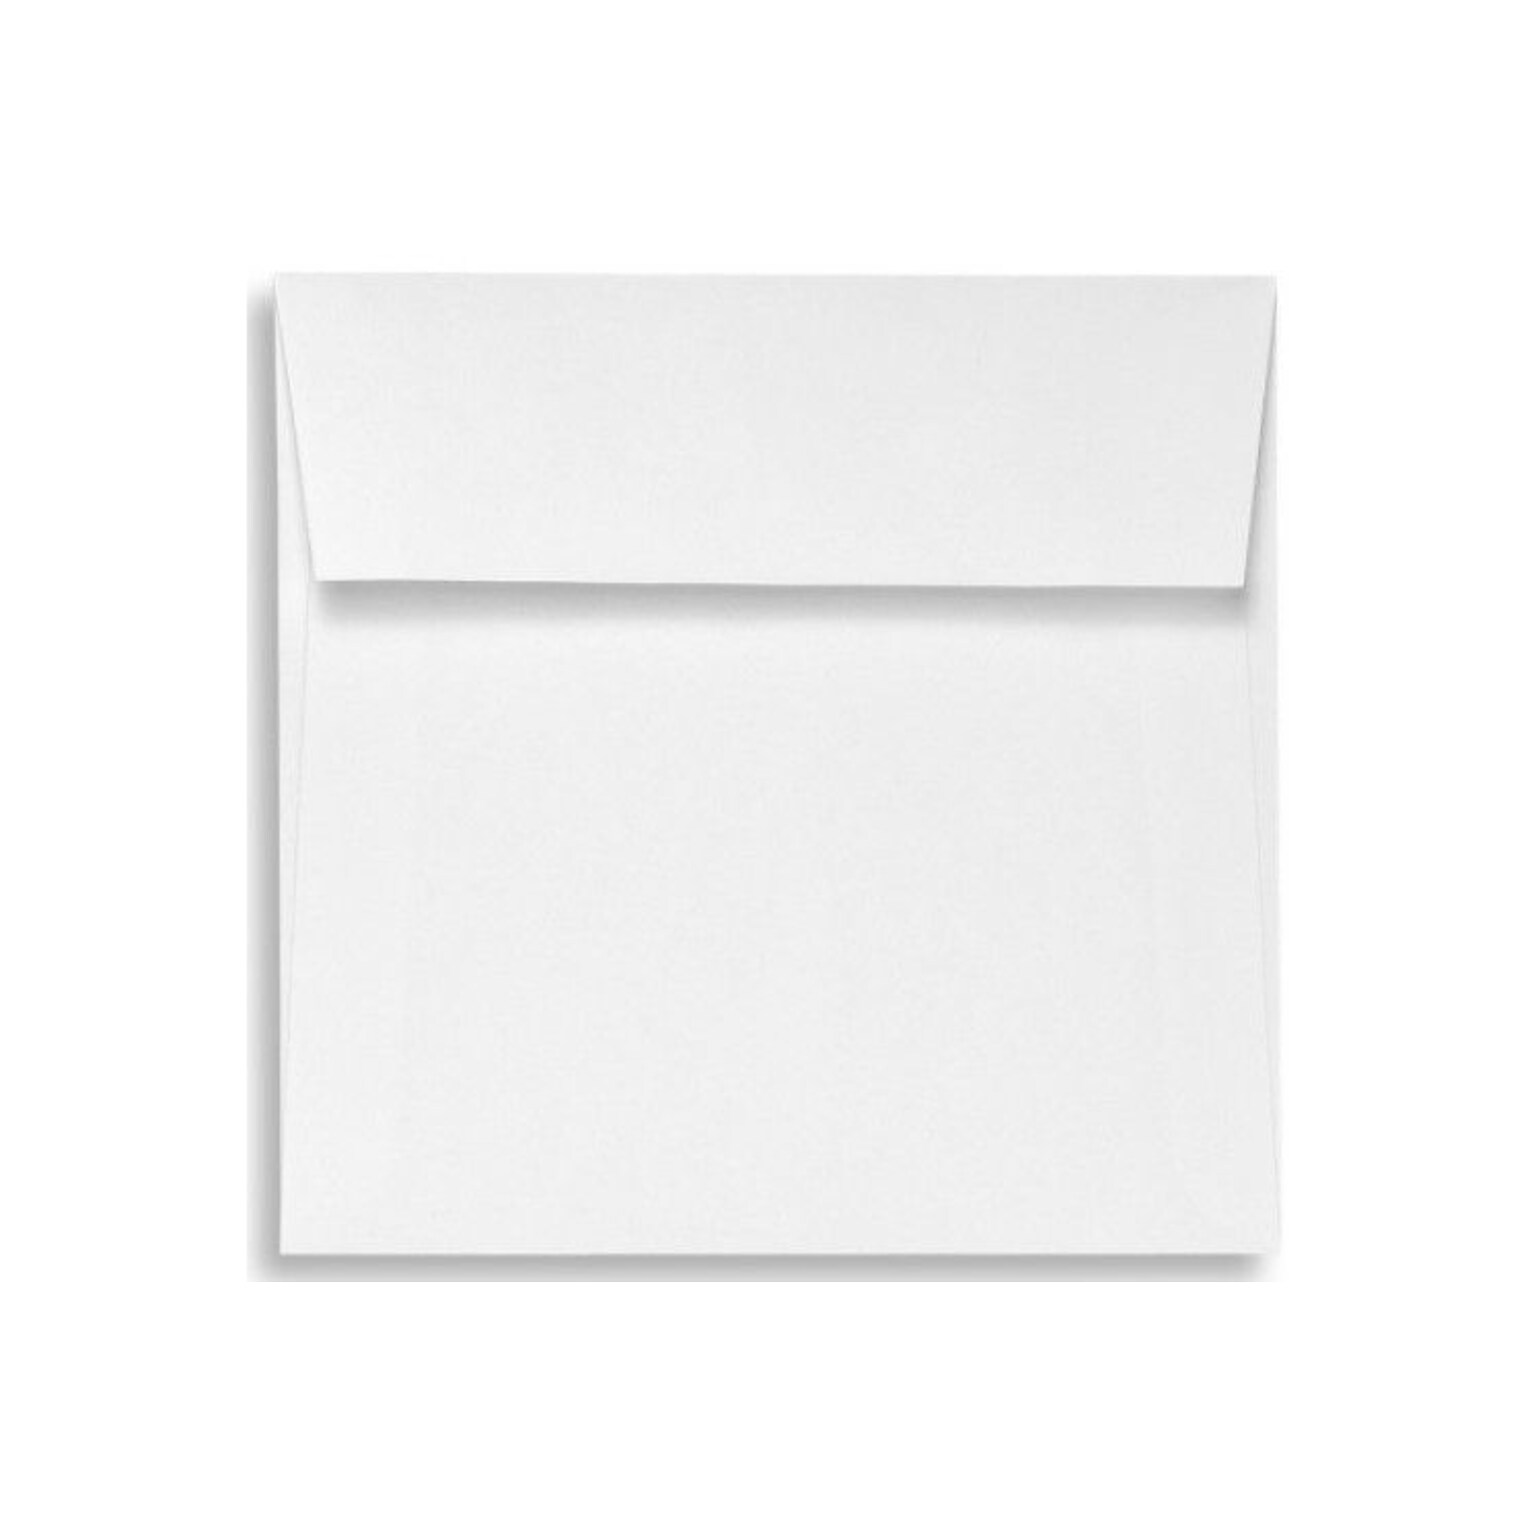 LUX 5 1/2 x 5 1/2 Square Envelopes, 50/Box, White - 100% Recycled (8515-WPC-50)